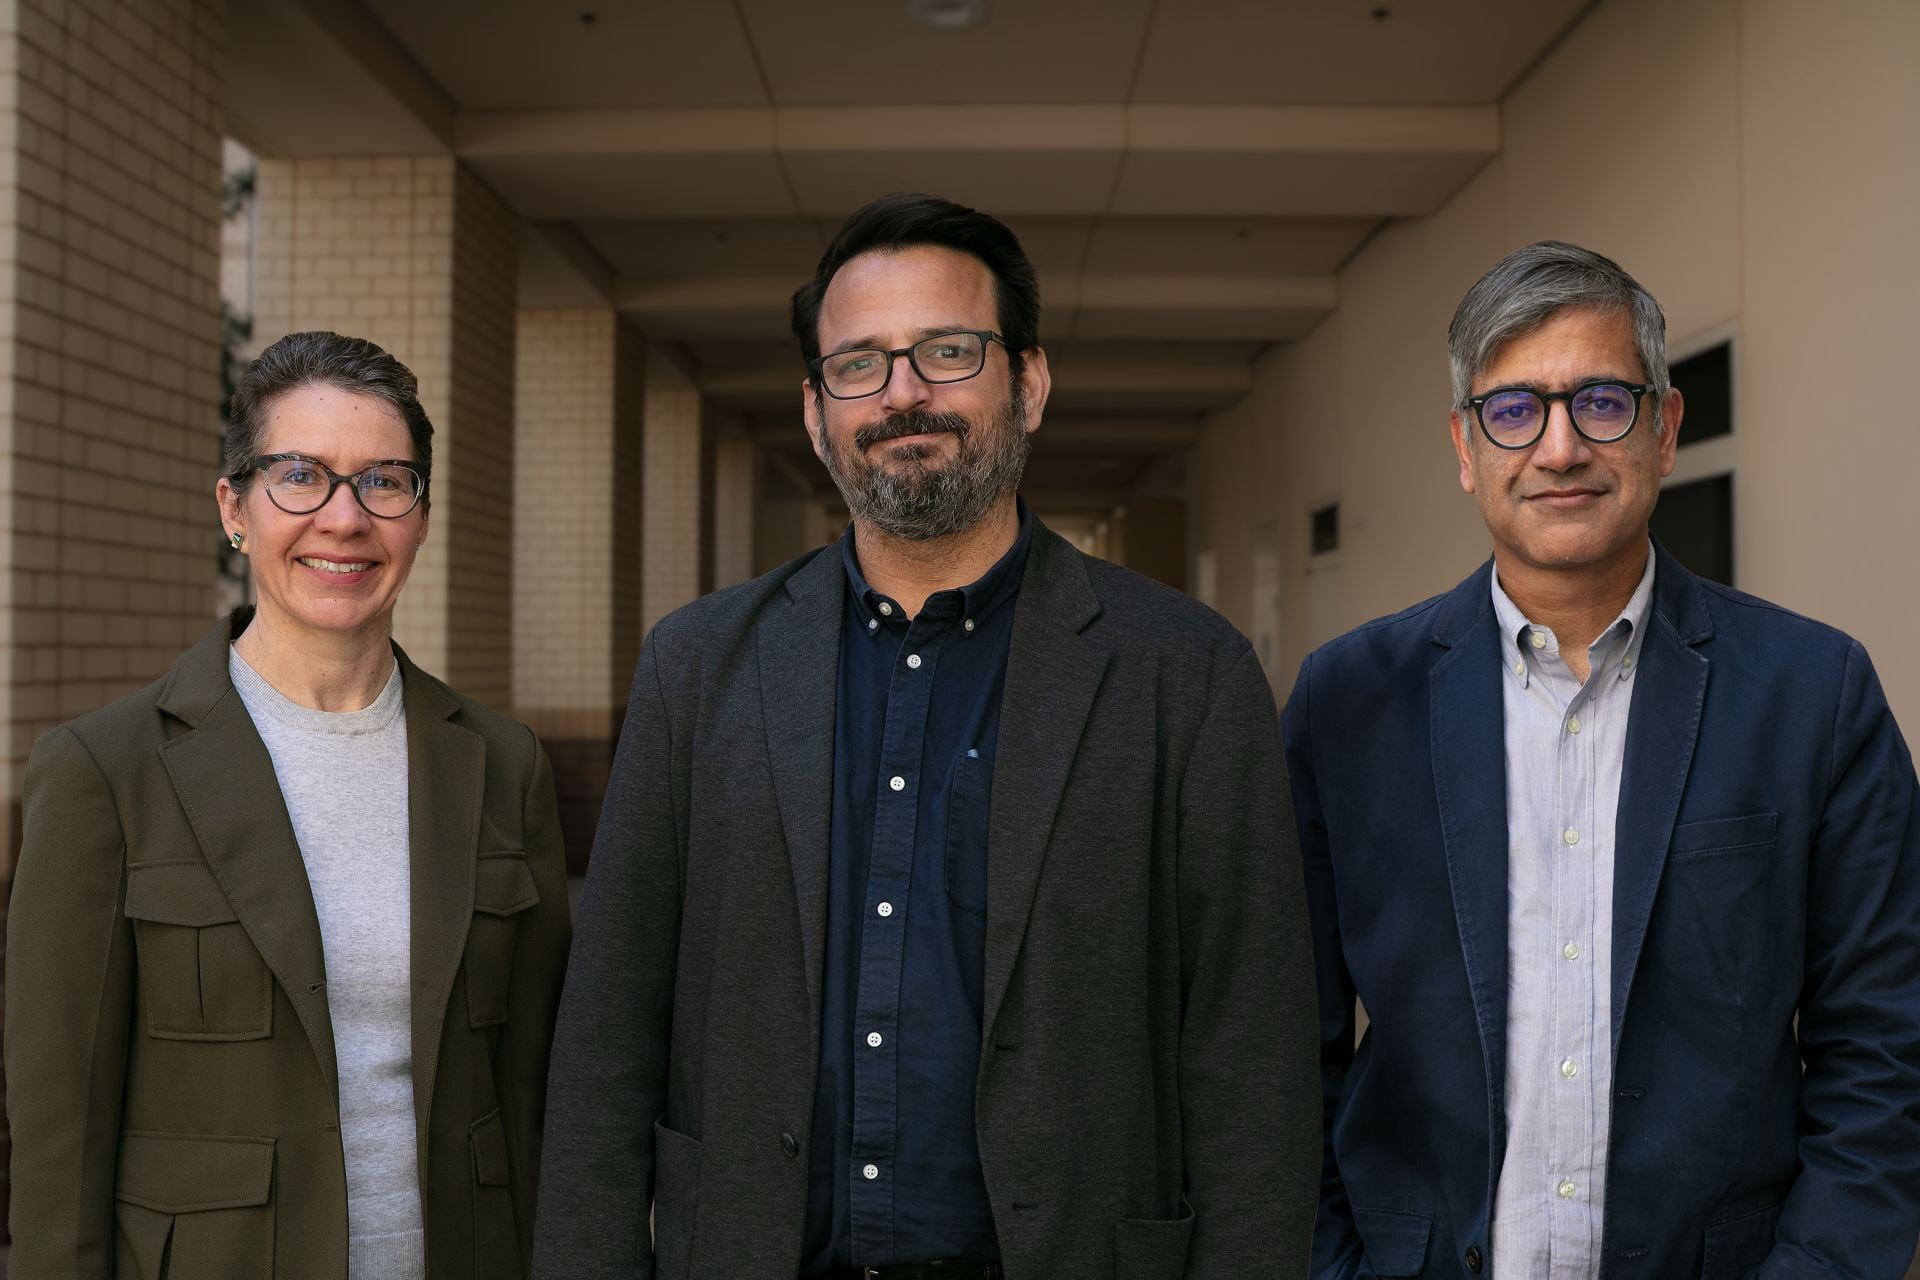 Virginia Parks, professor of urban planning and public policy; Walter Nicholls, professor and chair of urban planning and public policy; and Sameer Ashar, clinical professor of law and director of UCI’s Workers, Law and Organizing Clinic, (from left) will lead the UCI Labor Center.